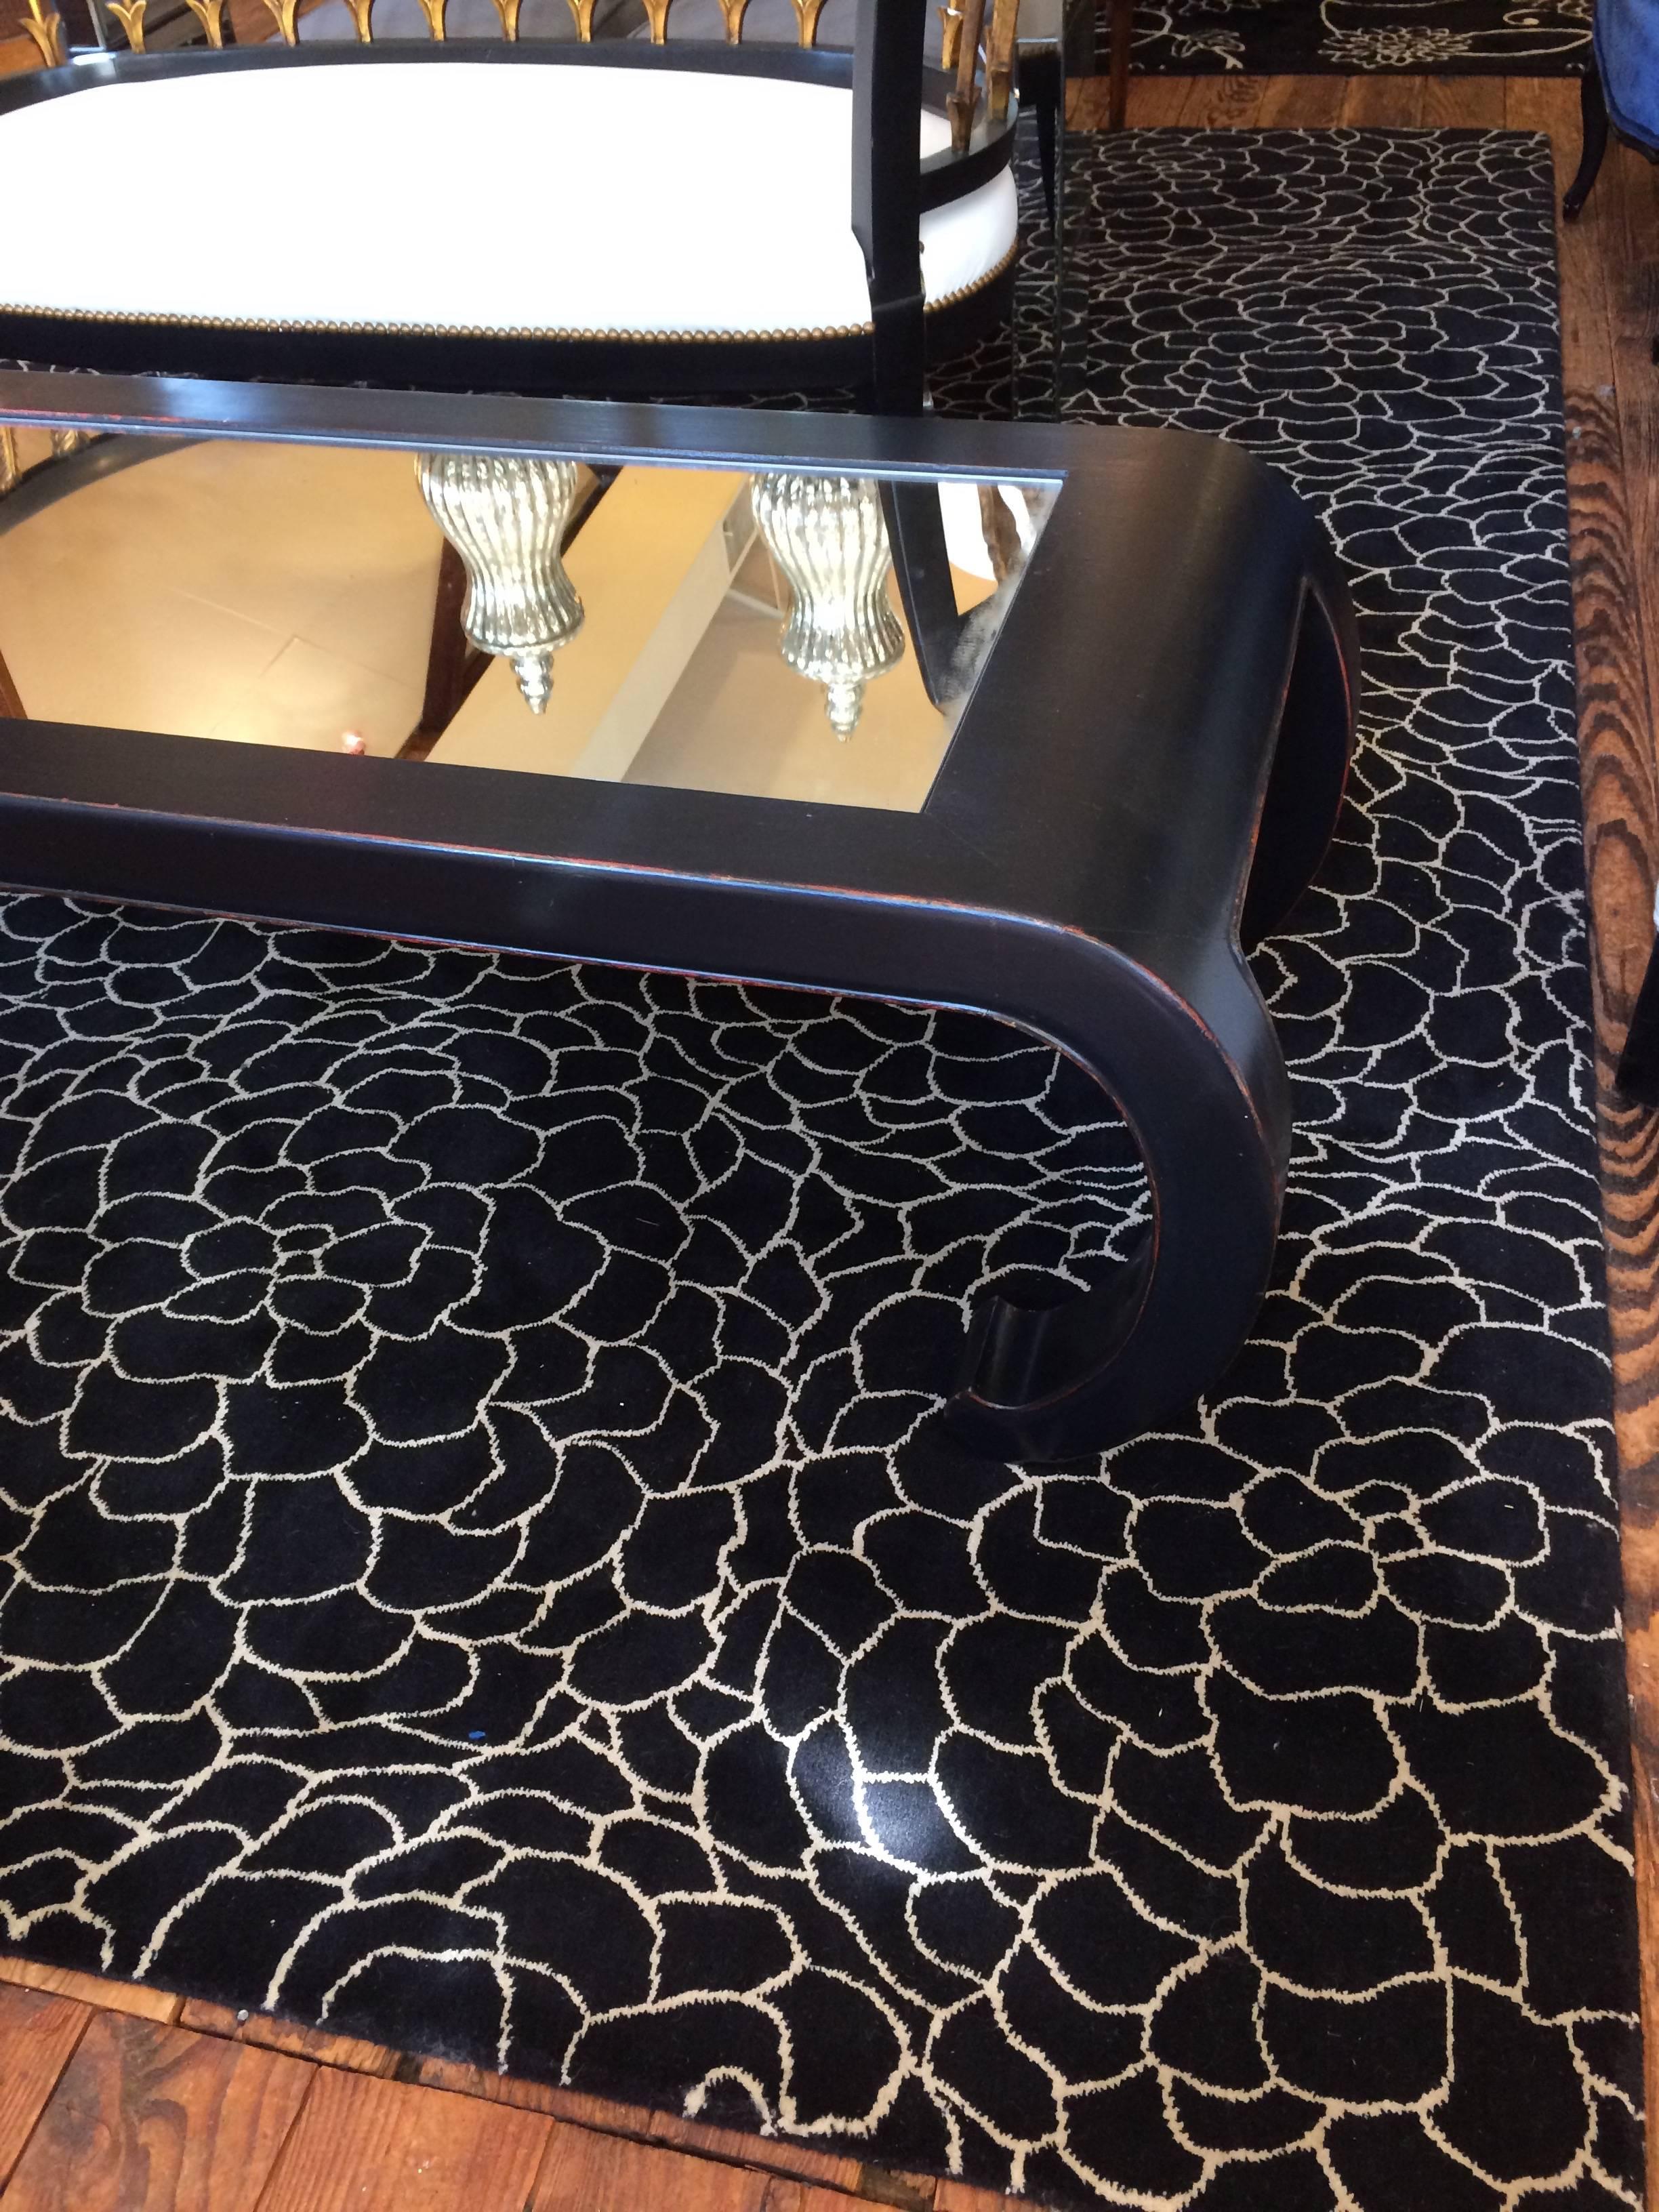 Asian inspired sleek ebonized coffee table with mirrored top.